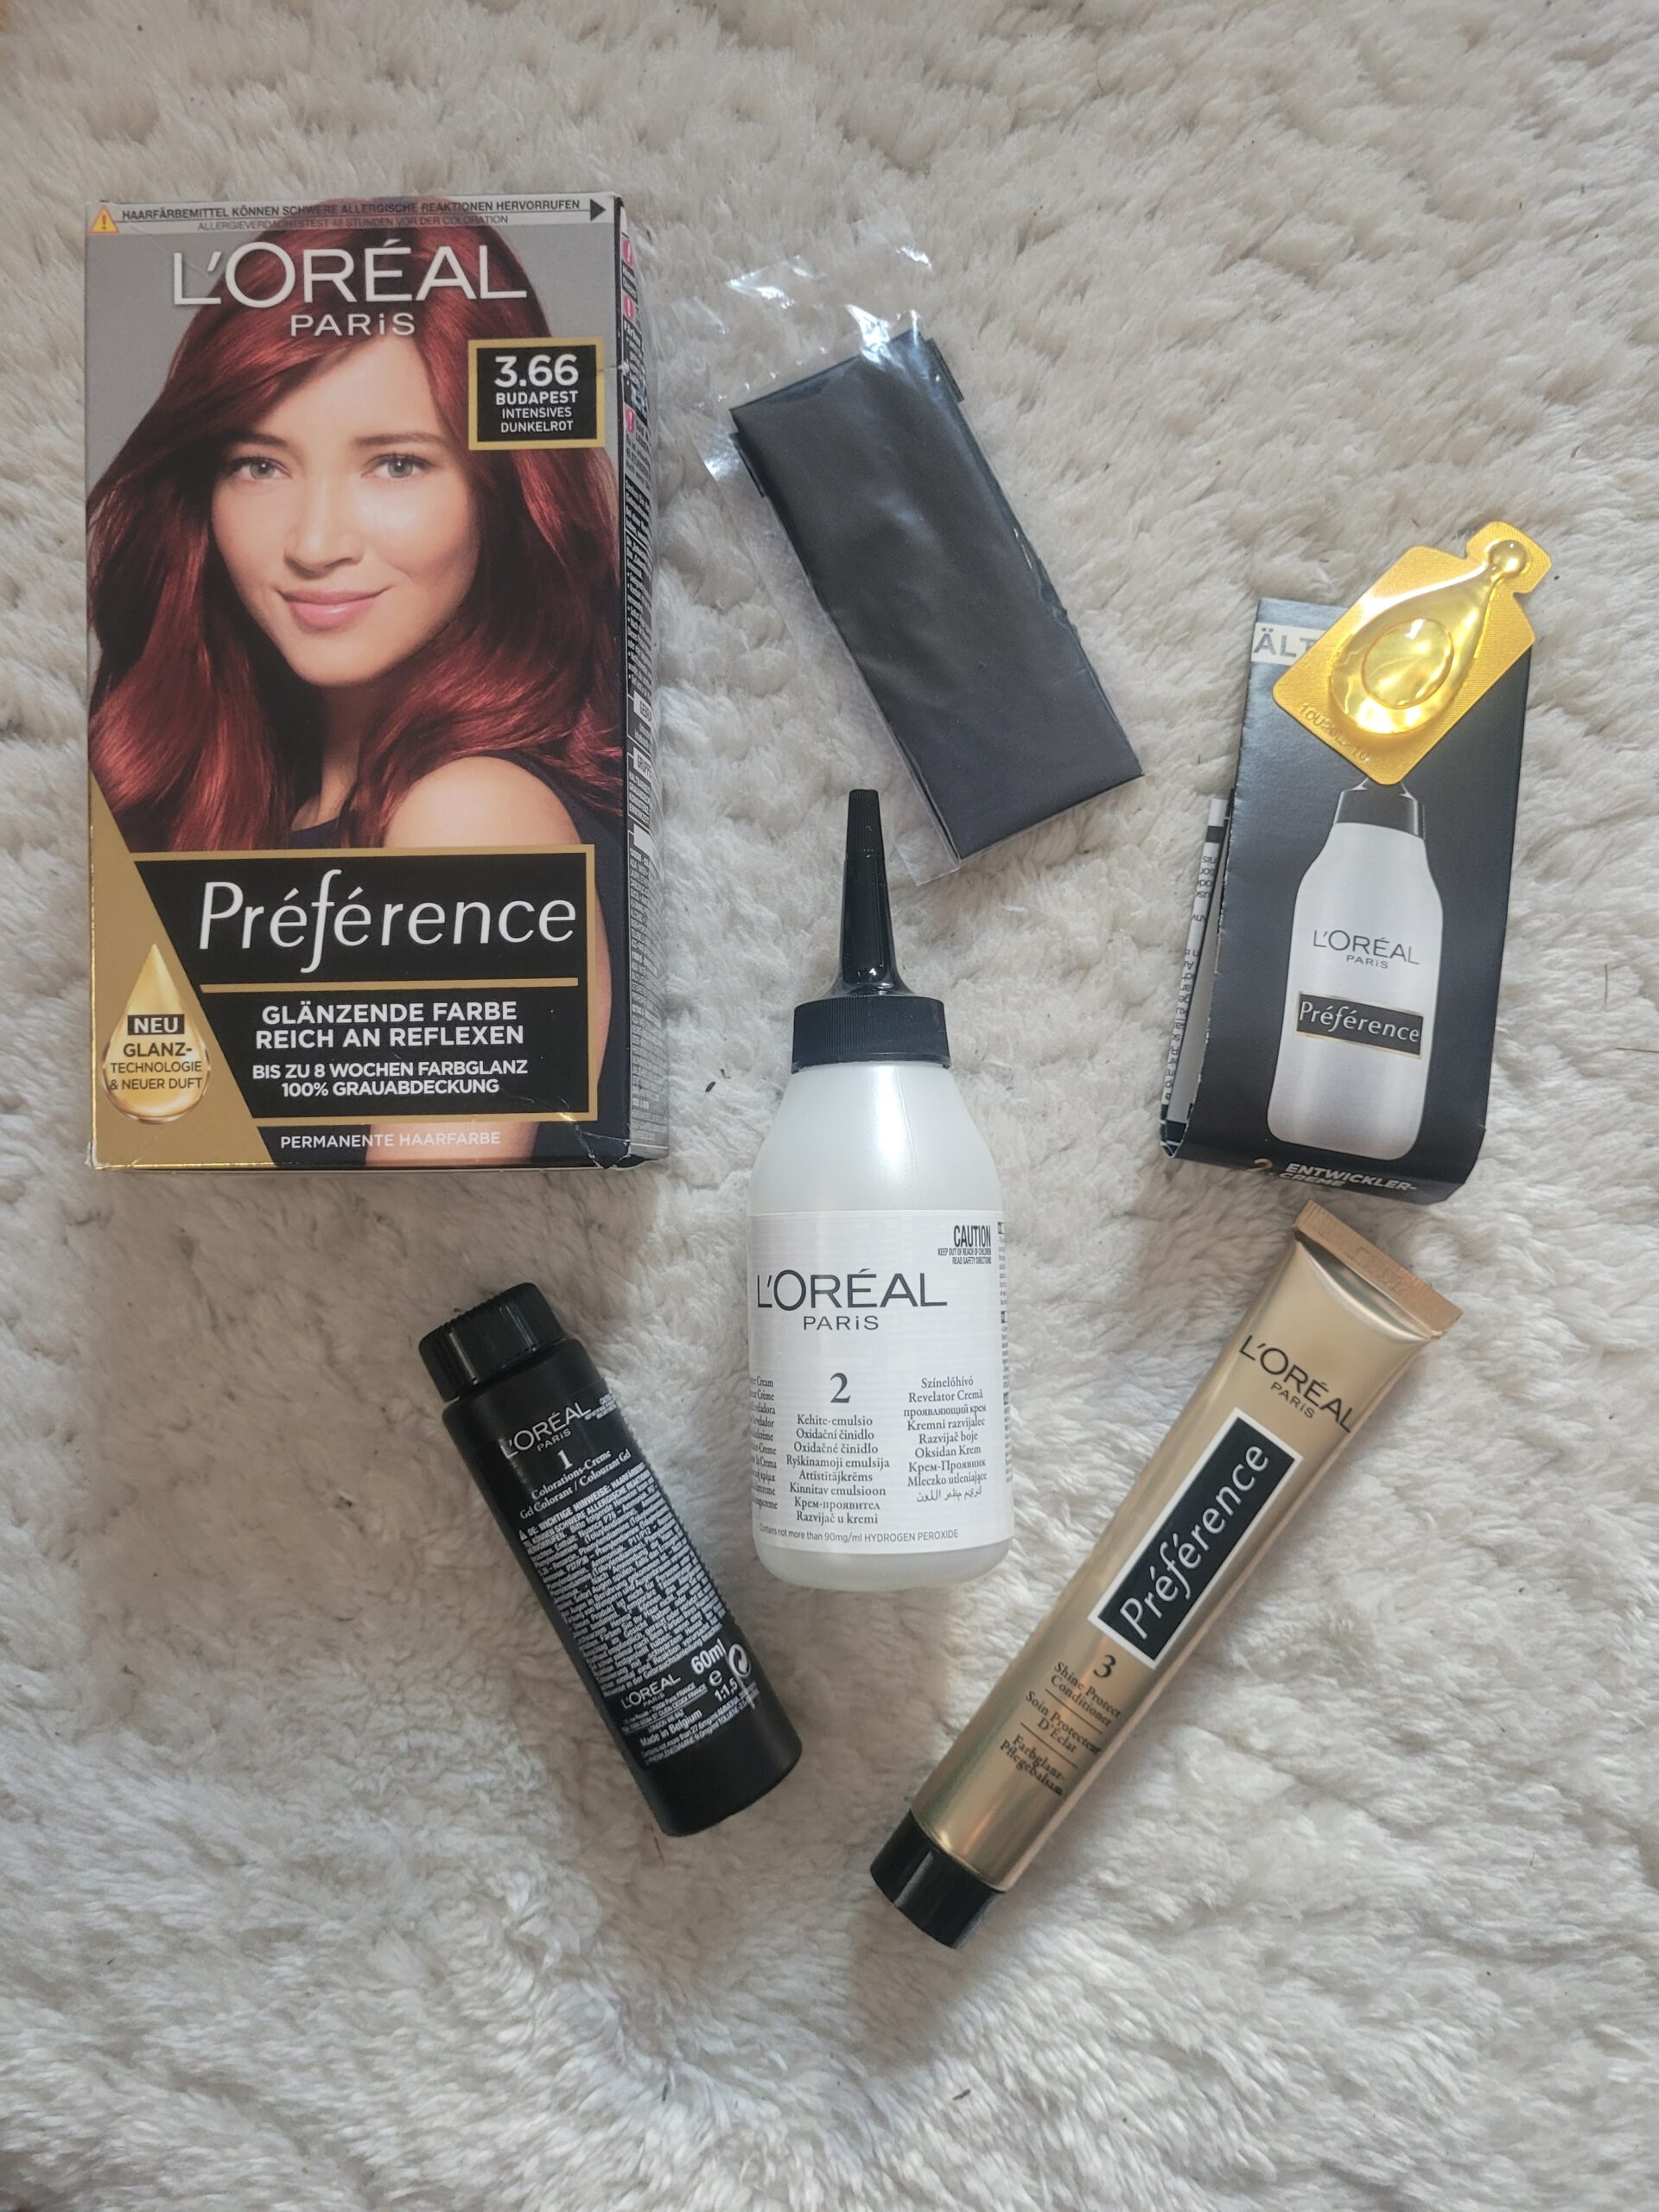 You are currently viewing L’OREAL Paris Préférence – Budapest intensives Dunkelrot<span class='yasr-stars-title-average'><div class='yasr-stars-title yasr-rater-stars'
                           id='yasr-overall-rating-rater-91ddbfa662c54'
                           data-rating='5'
                           data-rater-starsize='16'>
                       </div></span>